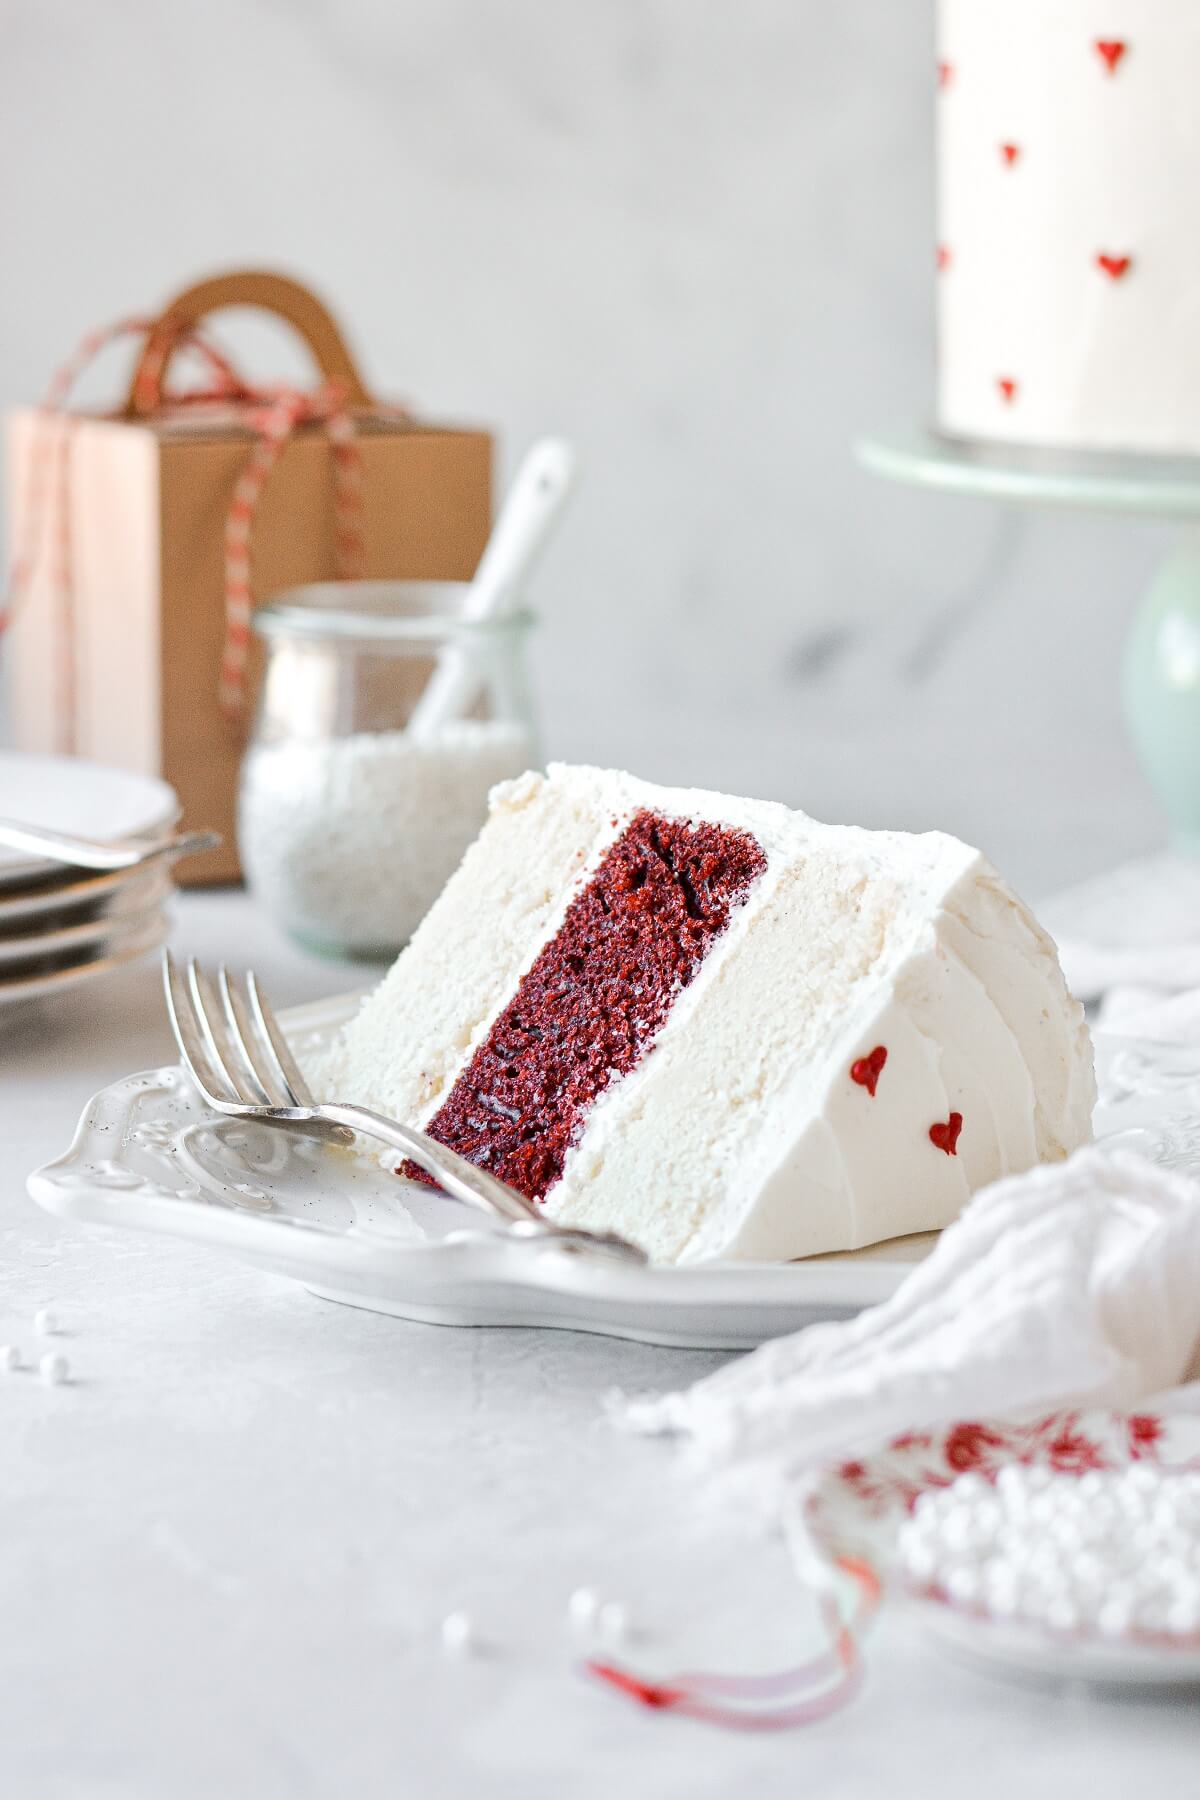 A slice of red and white striped cake for Valentines.